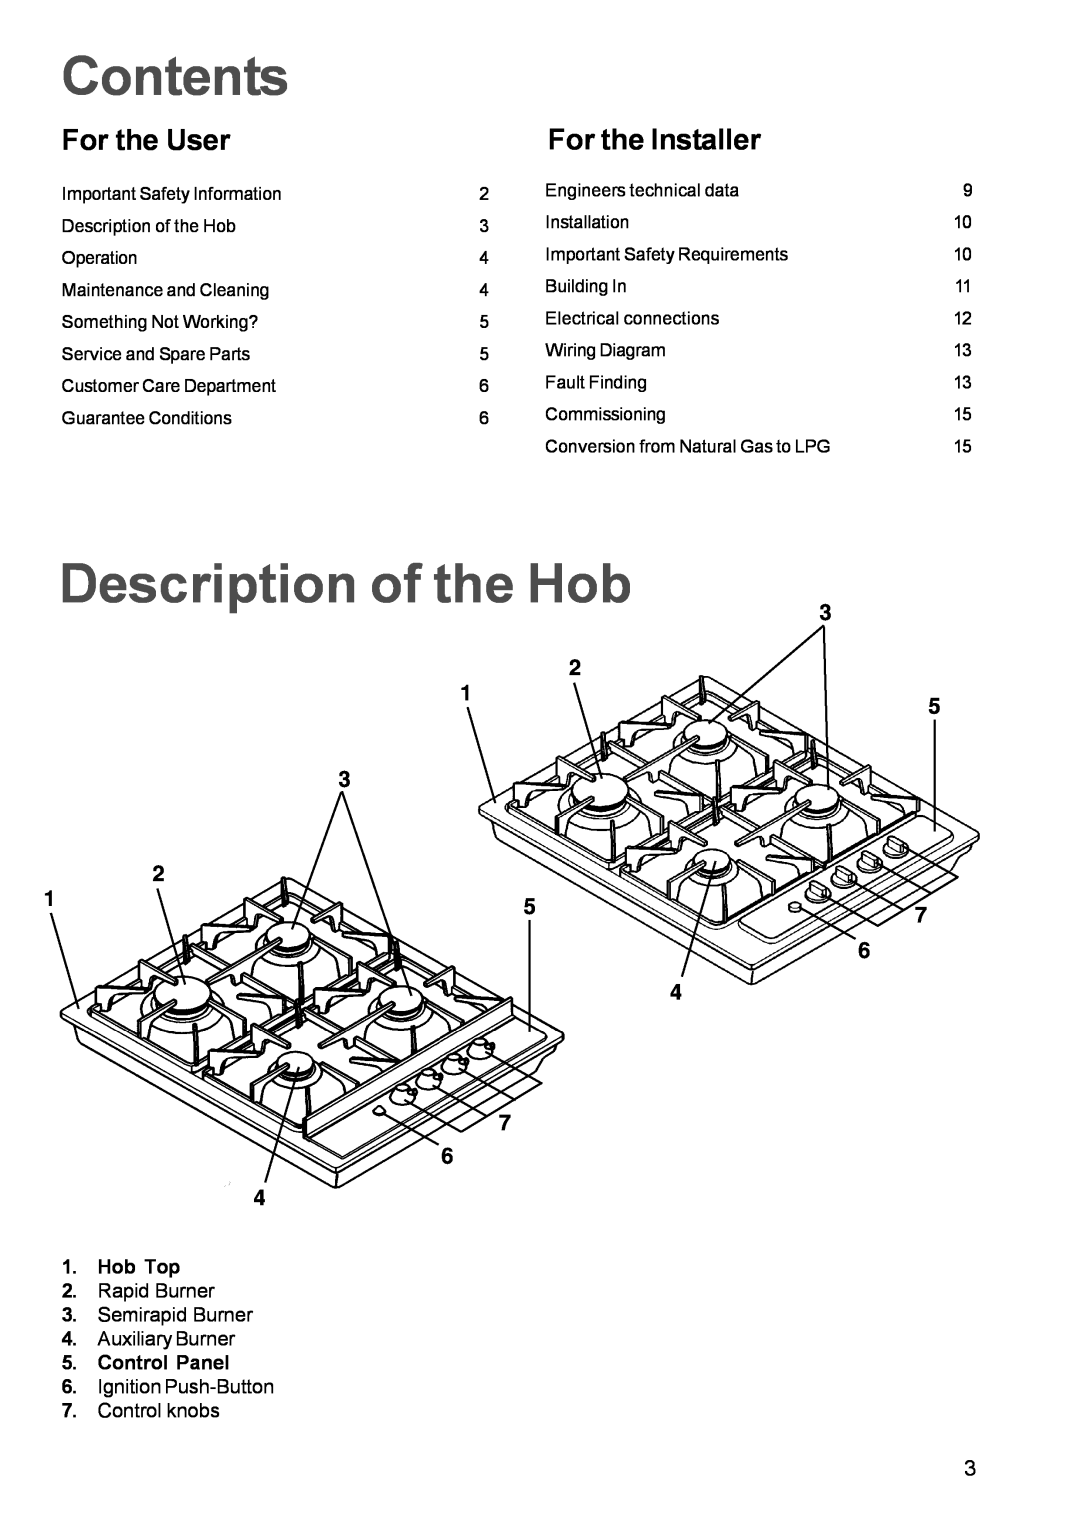 Zanussi GAS HOB manual Contents, Description of the Hob, For the User, For the Installer 